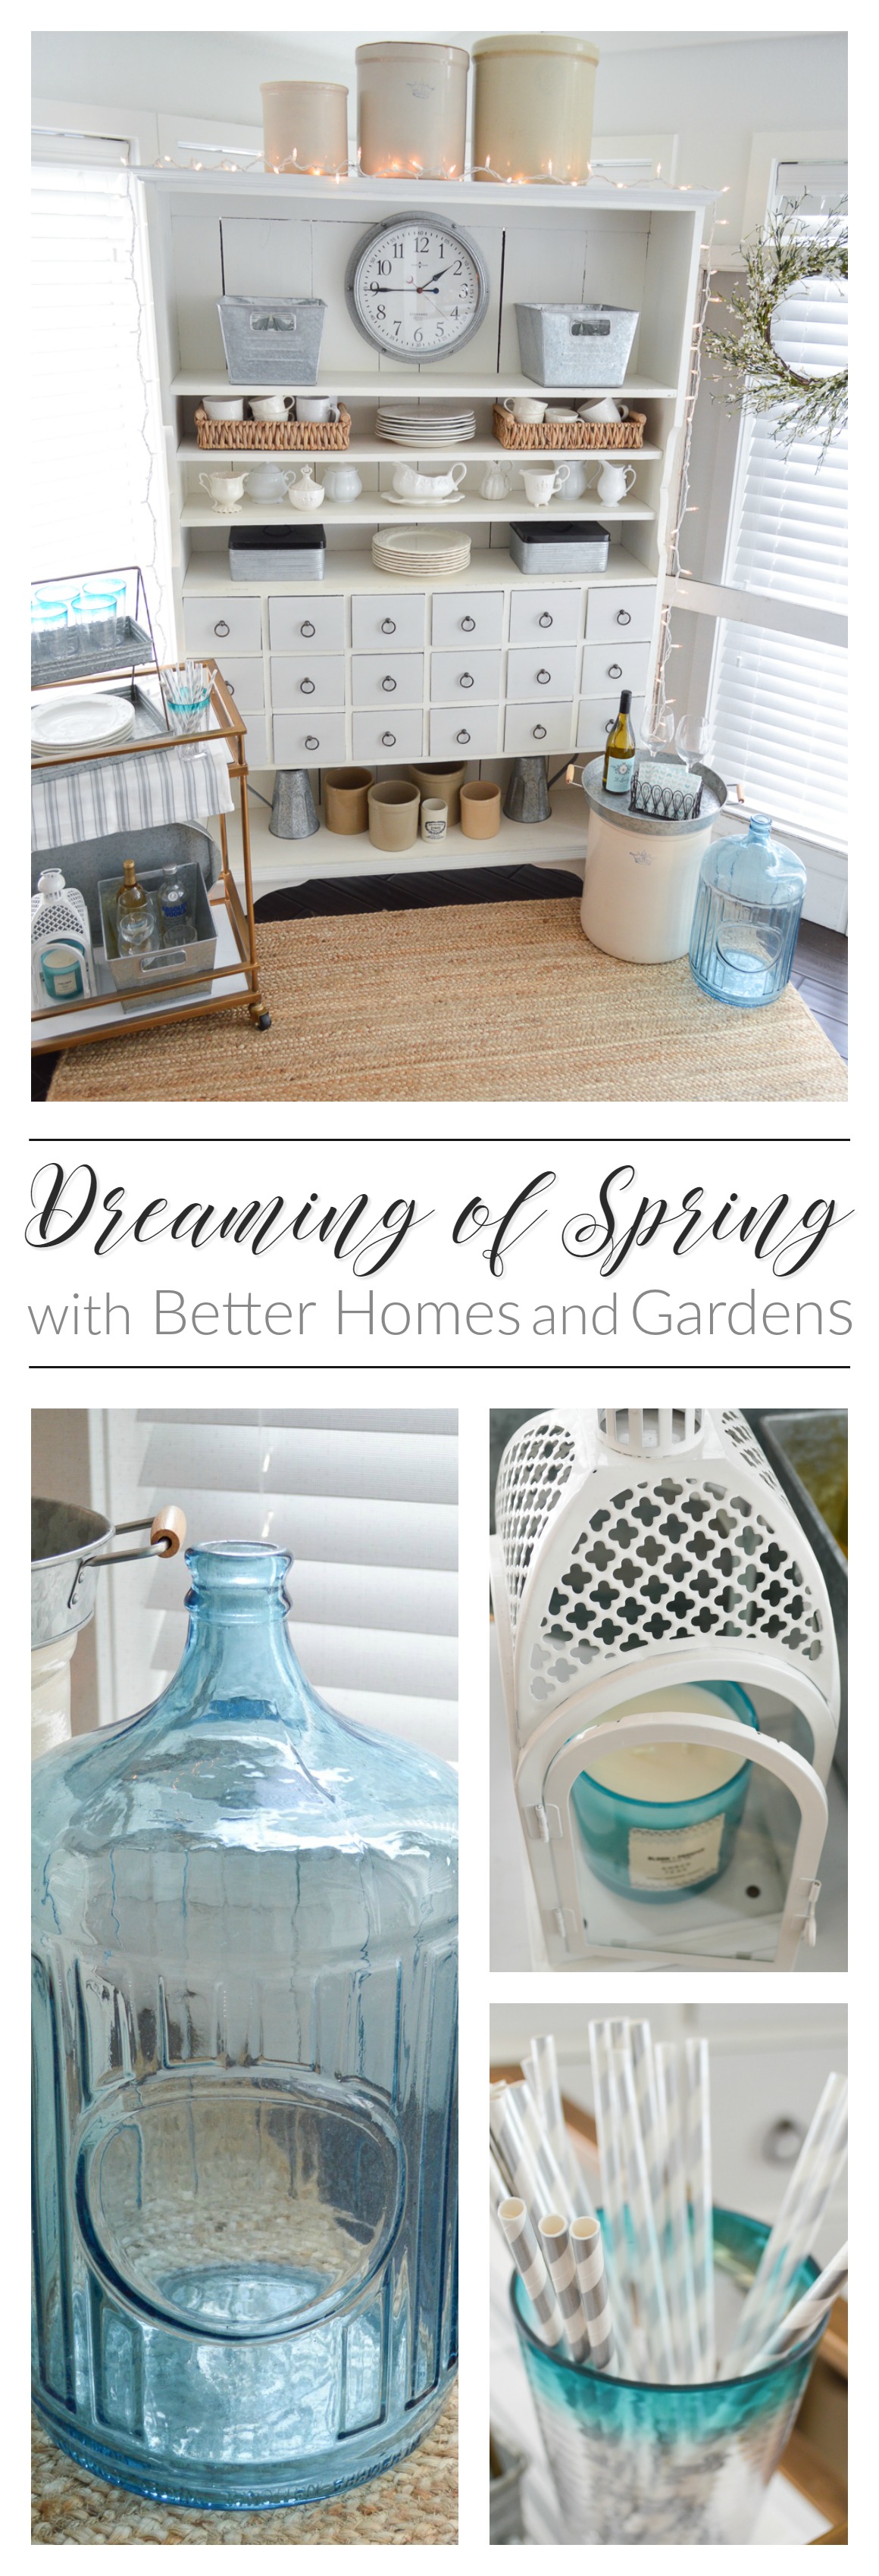 Dreaming of Spring Entertaining with BHG | The Better Homes and Gardens line is bursting with galvanized metal goods that are so versatile, and super affordable too! Come see the home decor that works for farmhouse, cottage and vintage lovers alike!